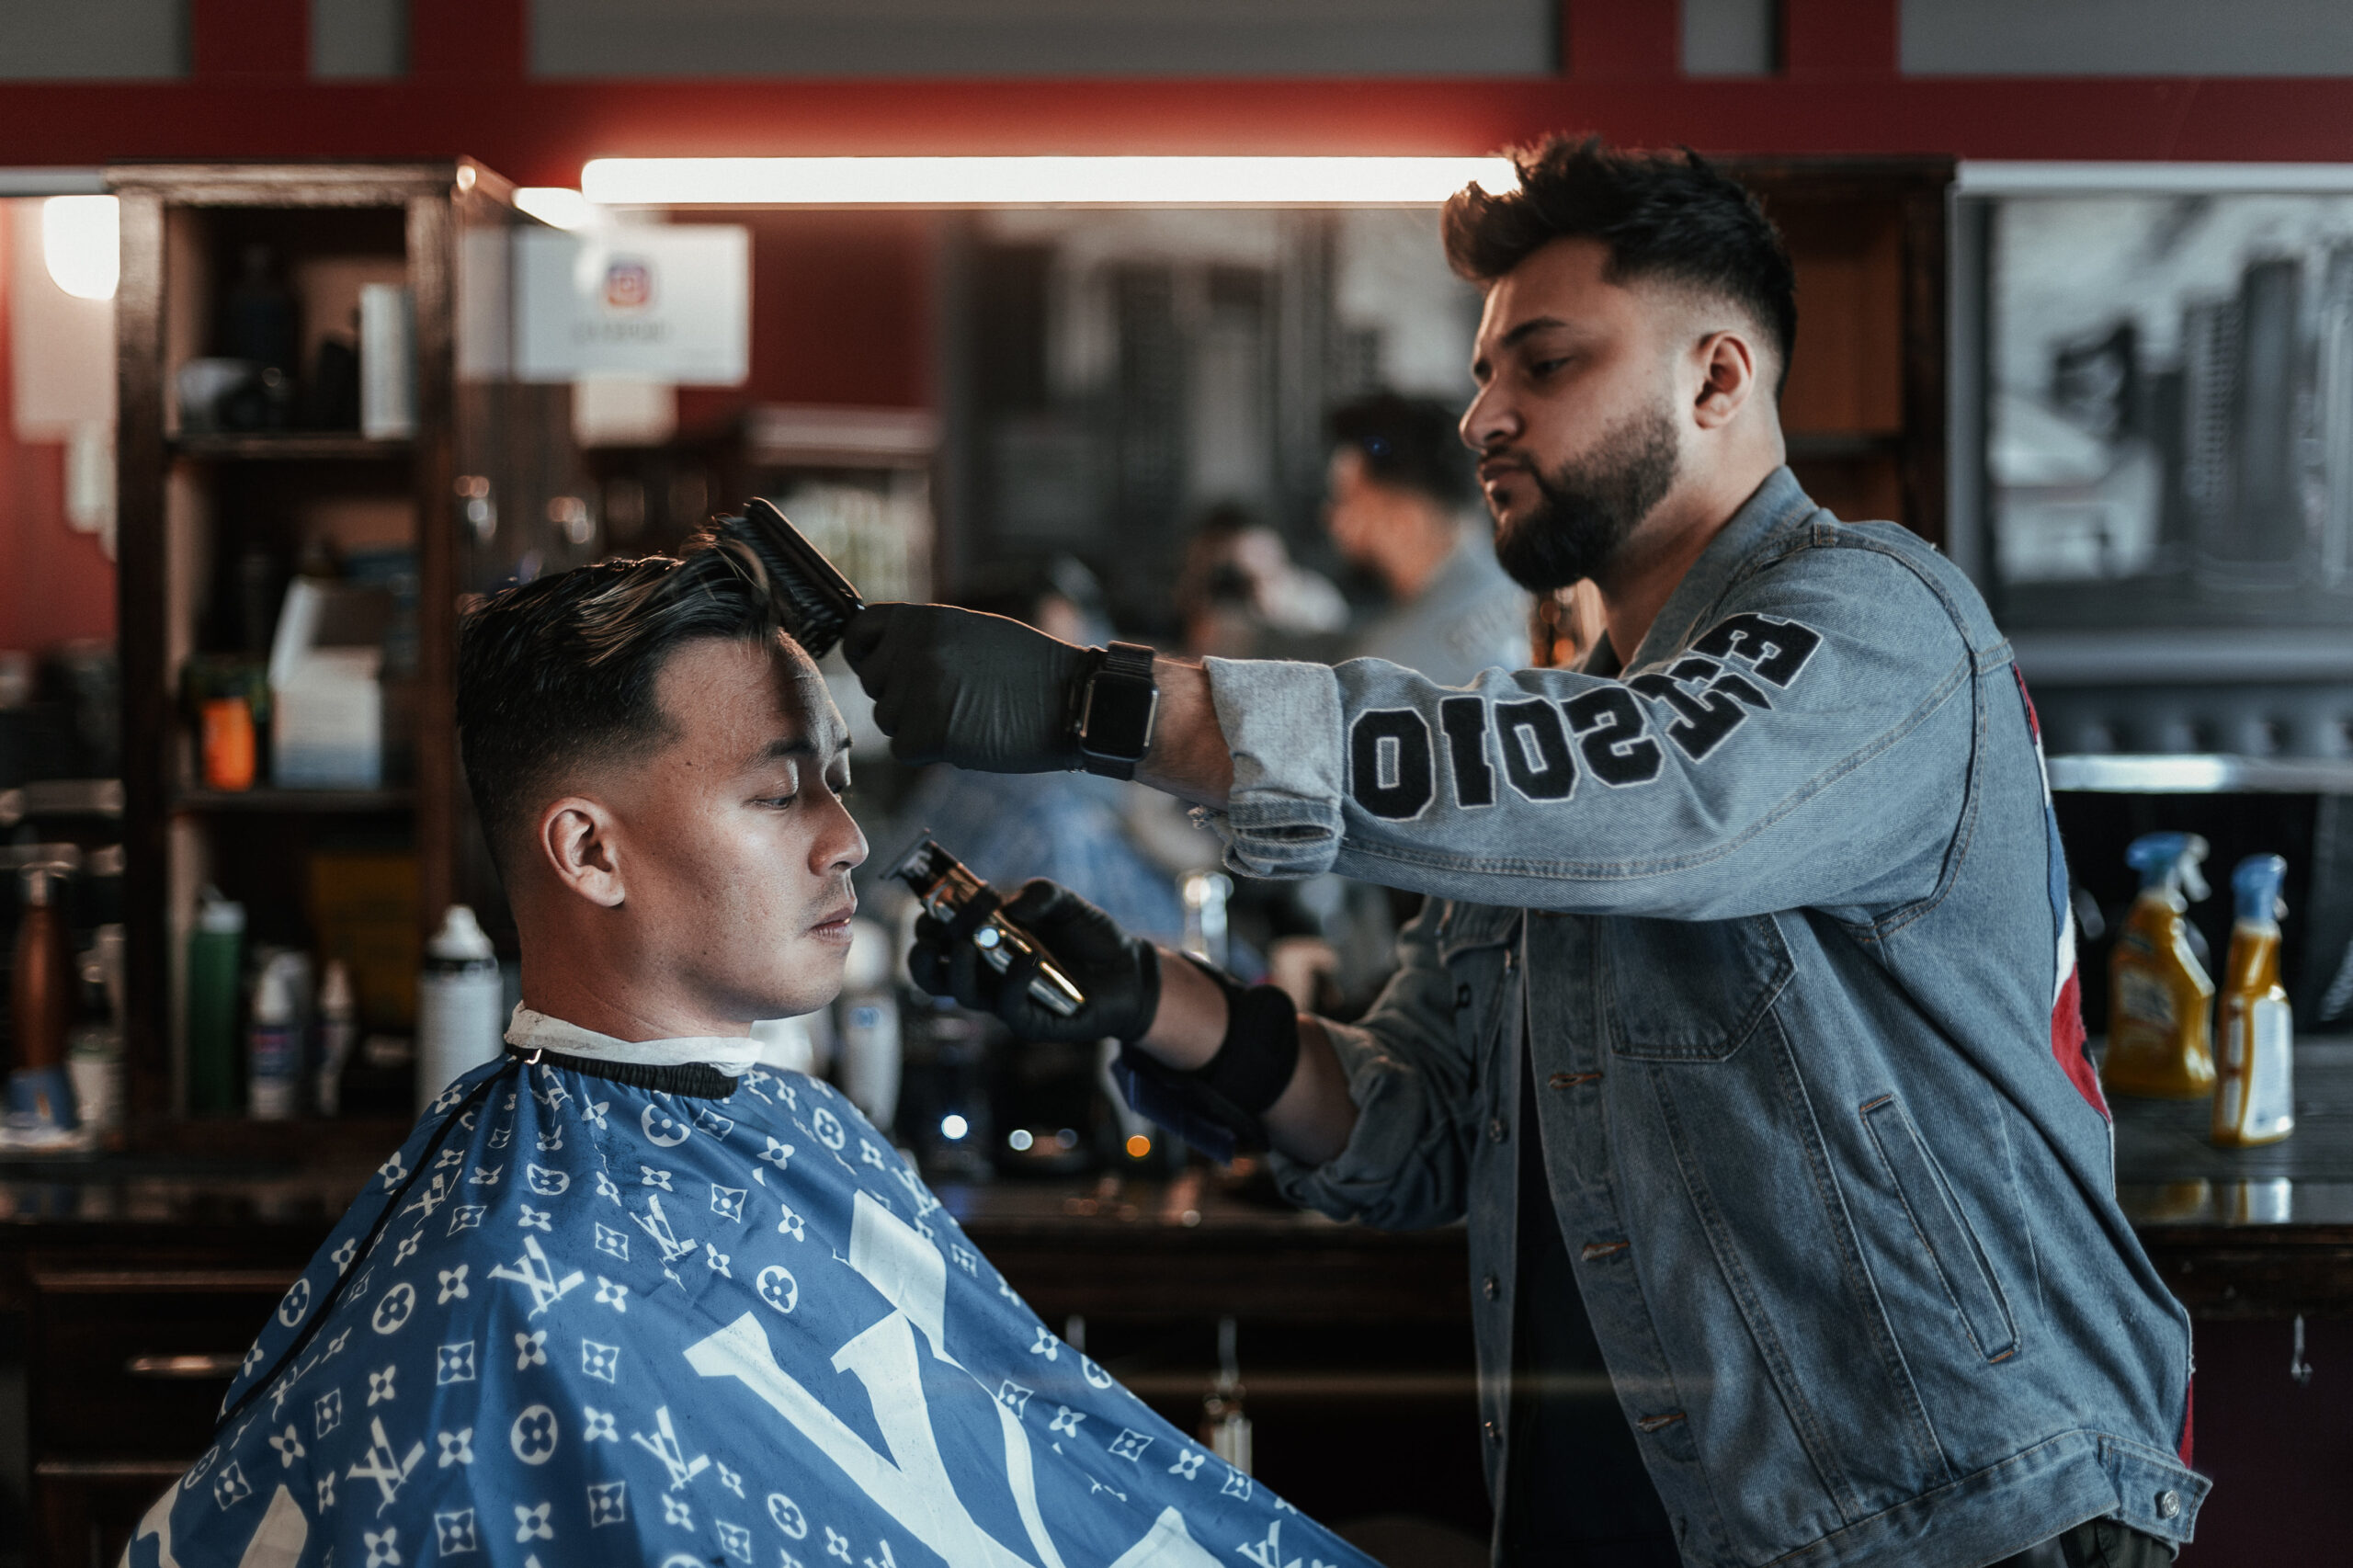 barber brushes and cuts hair scaled